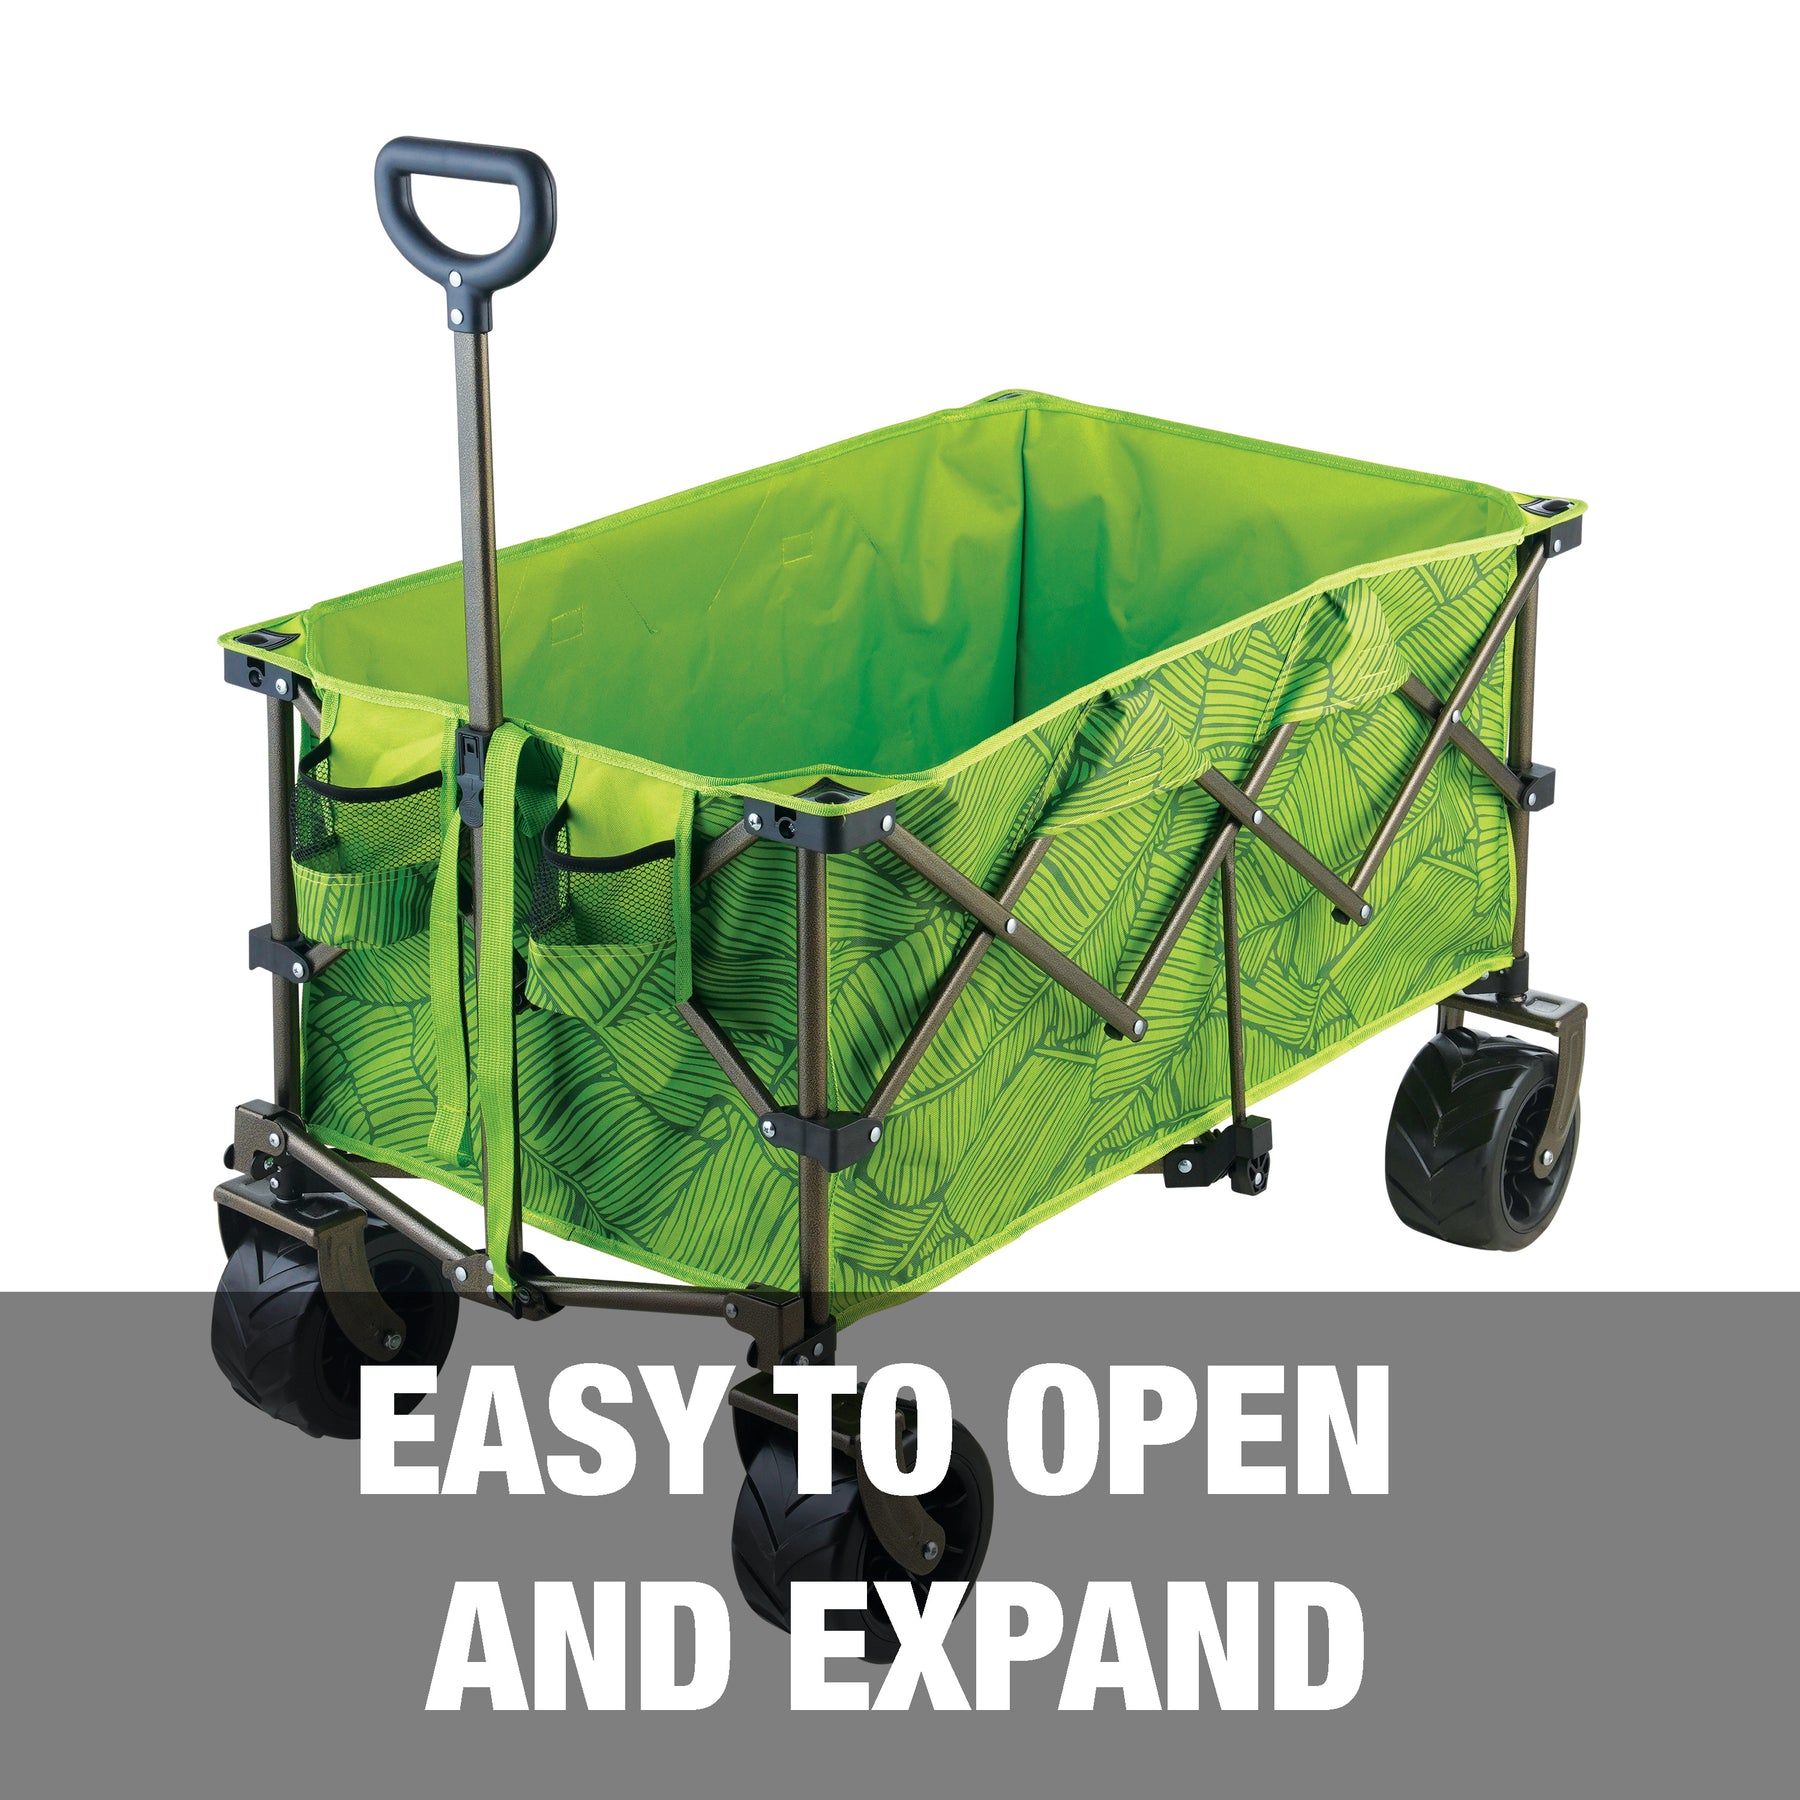 Bliss Hammocks 36-inch Collapsible Garden Cart/Beach Wagon is easy to open and expand.